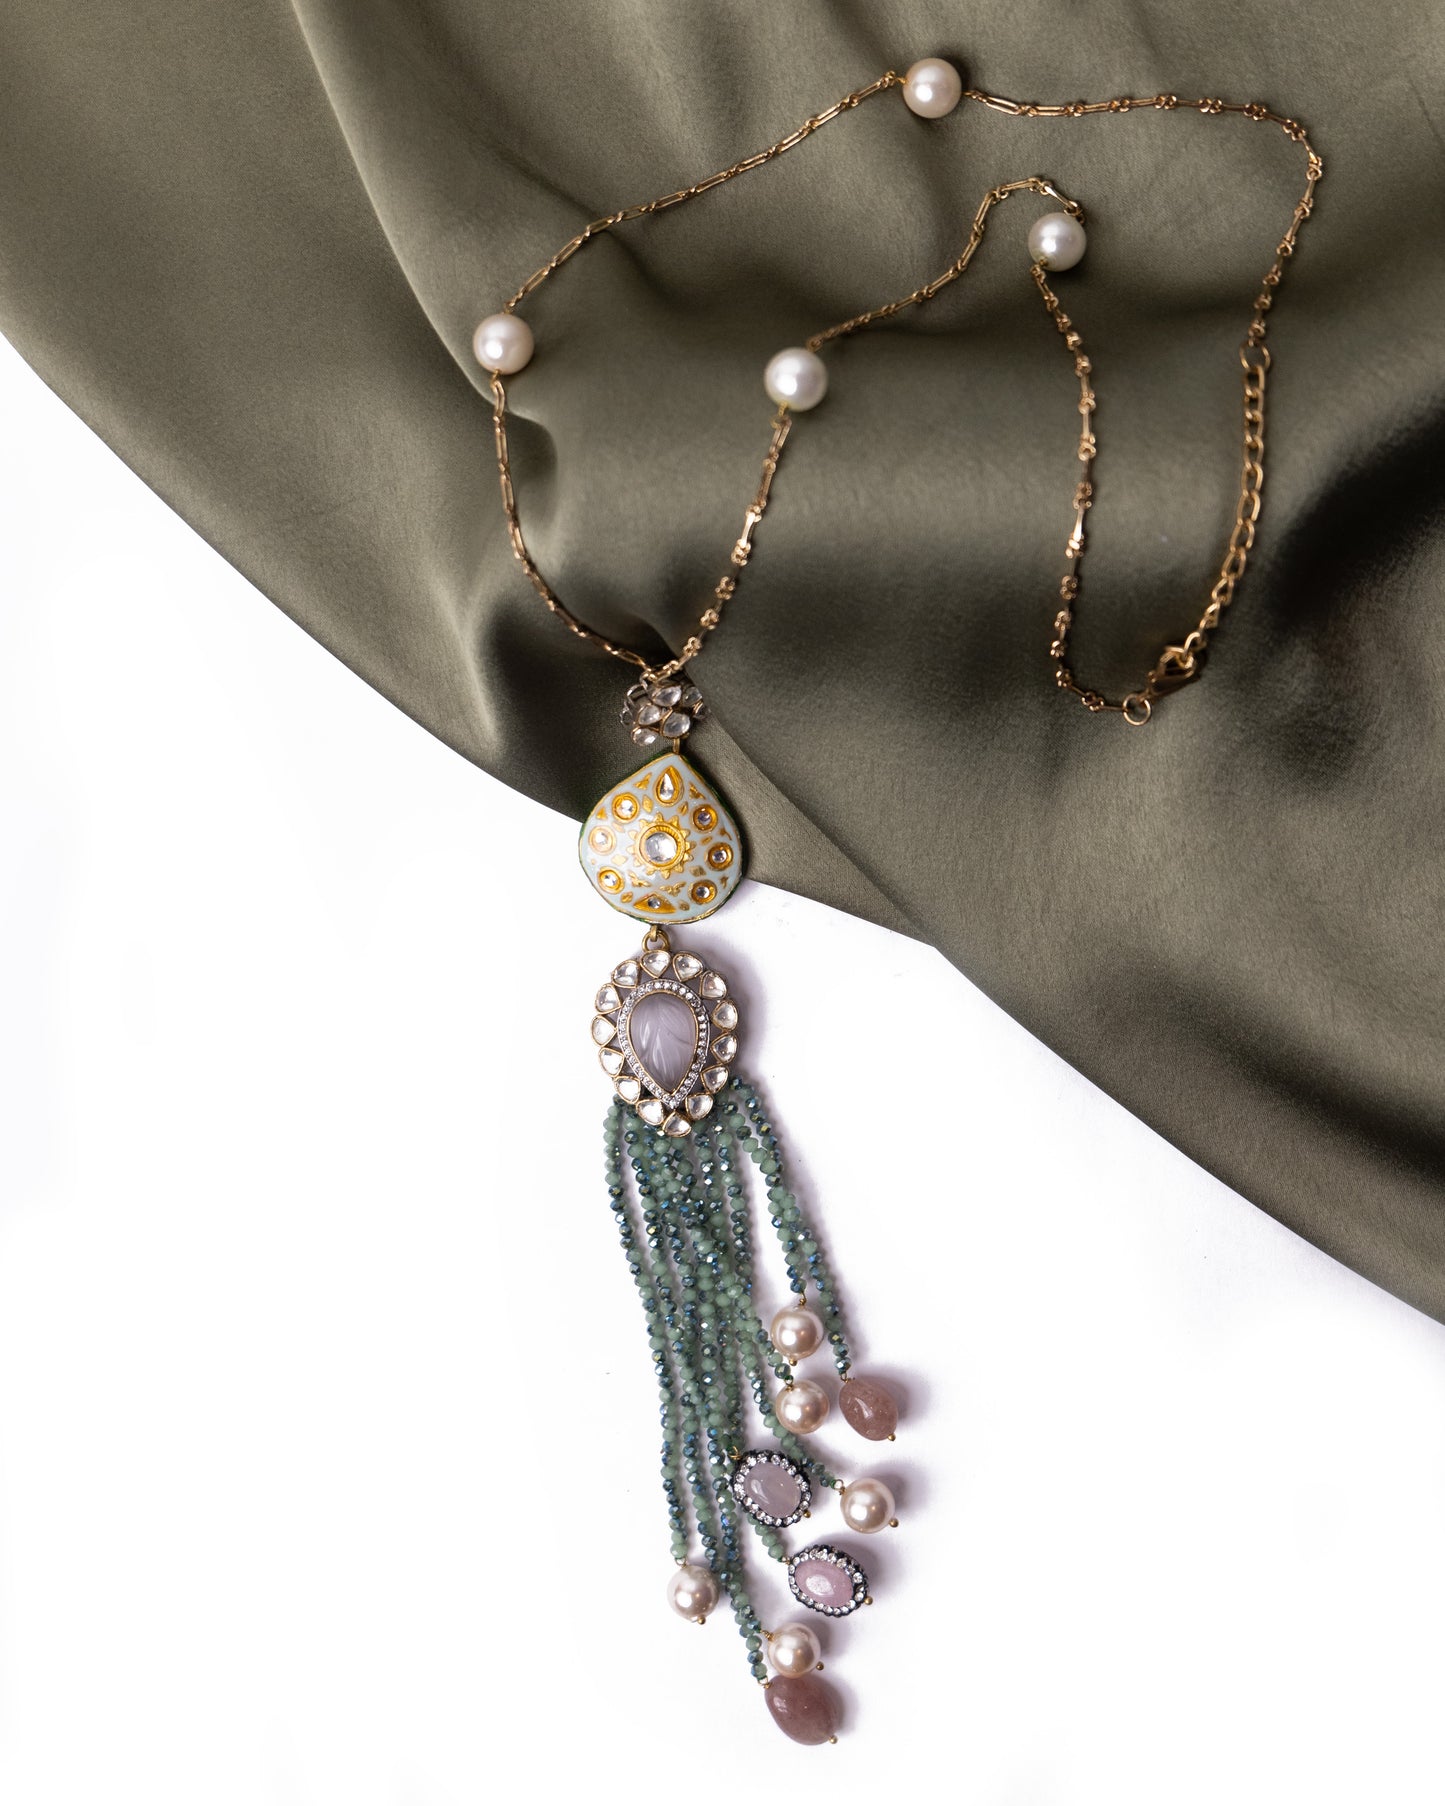 Fusion necklace with tassle in blue and mauve